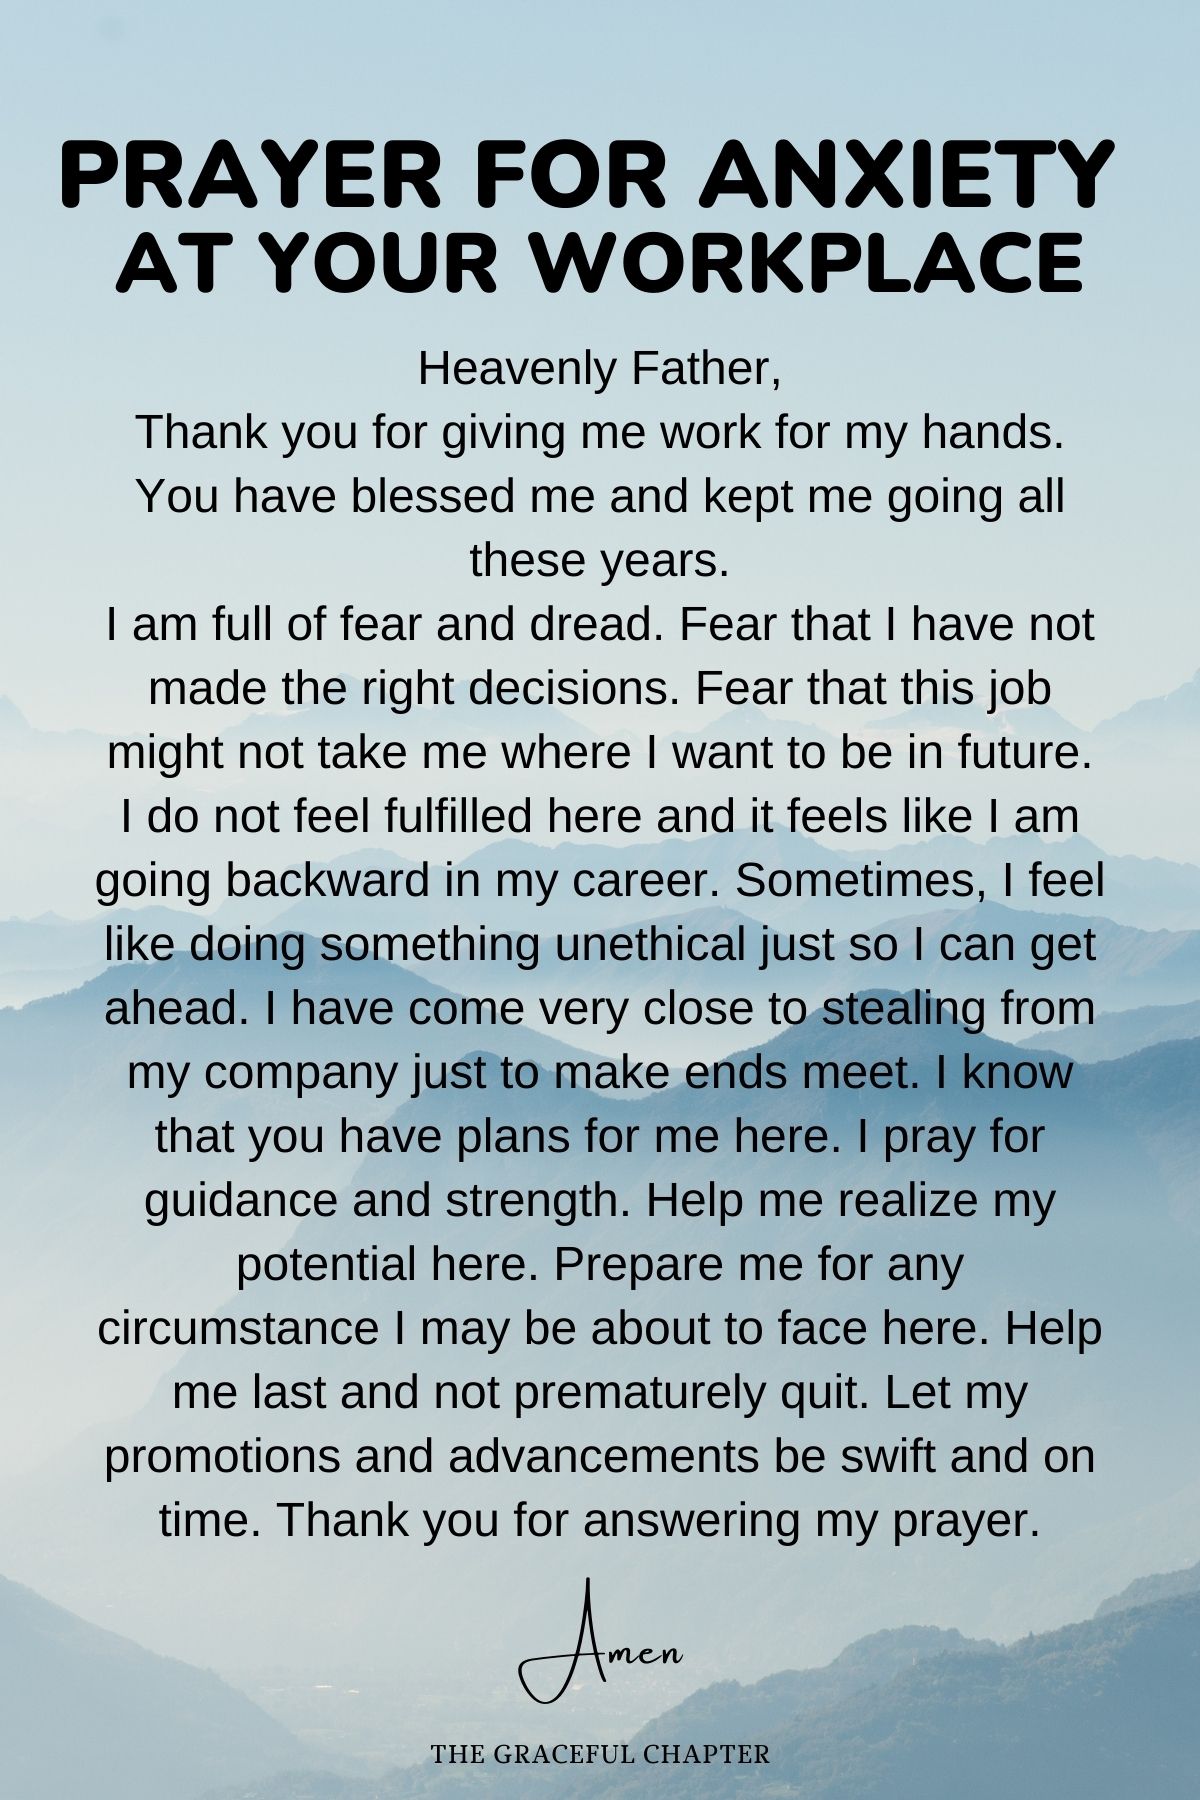 Prayer for Anxiety at your Workplace